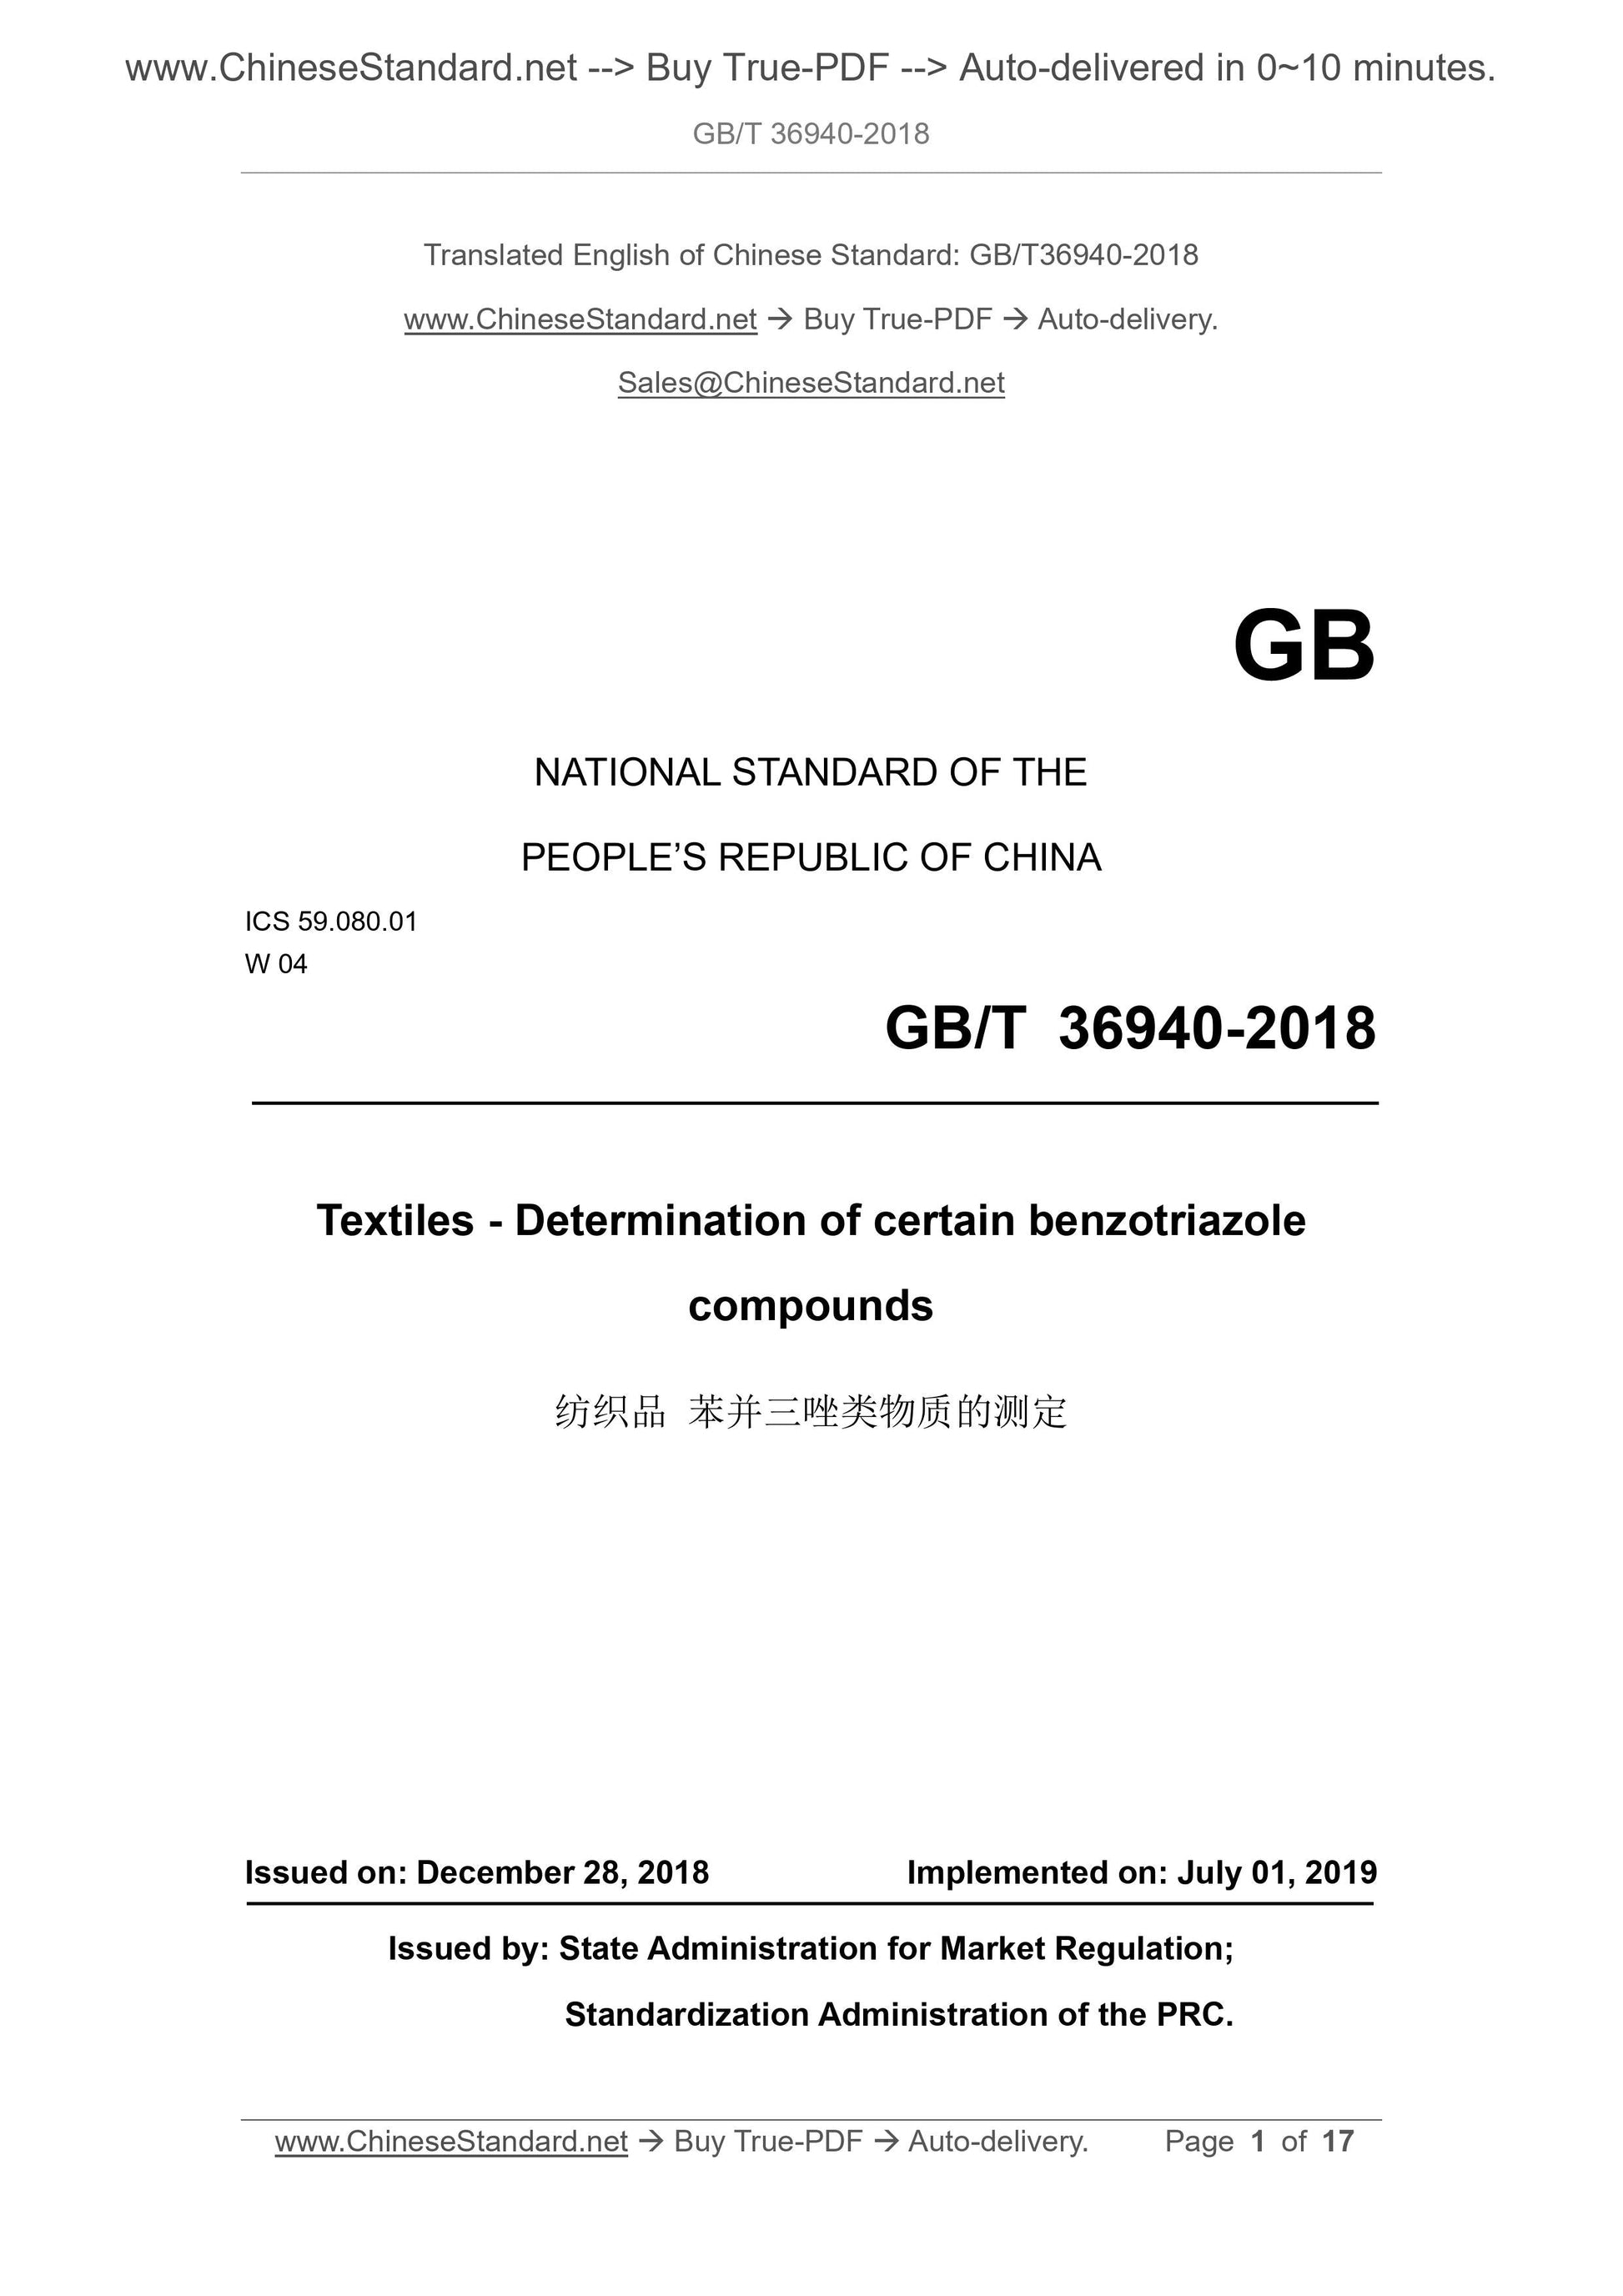 GB/T 36940-2018 Page 1